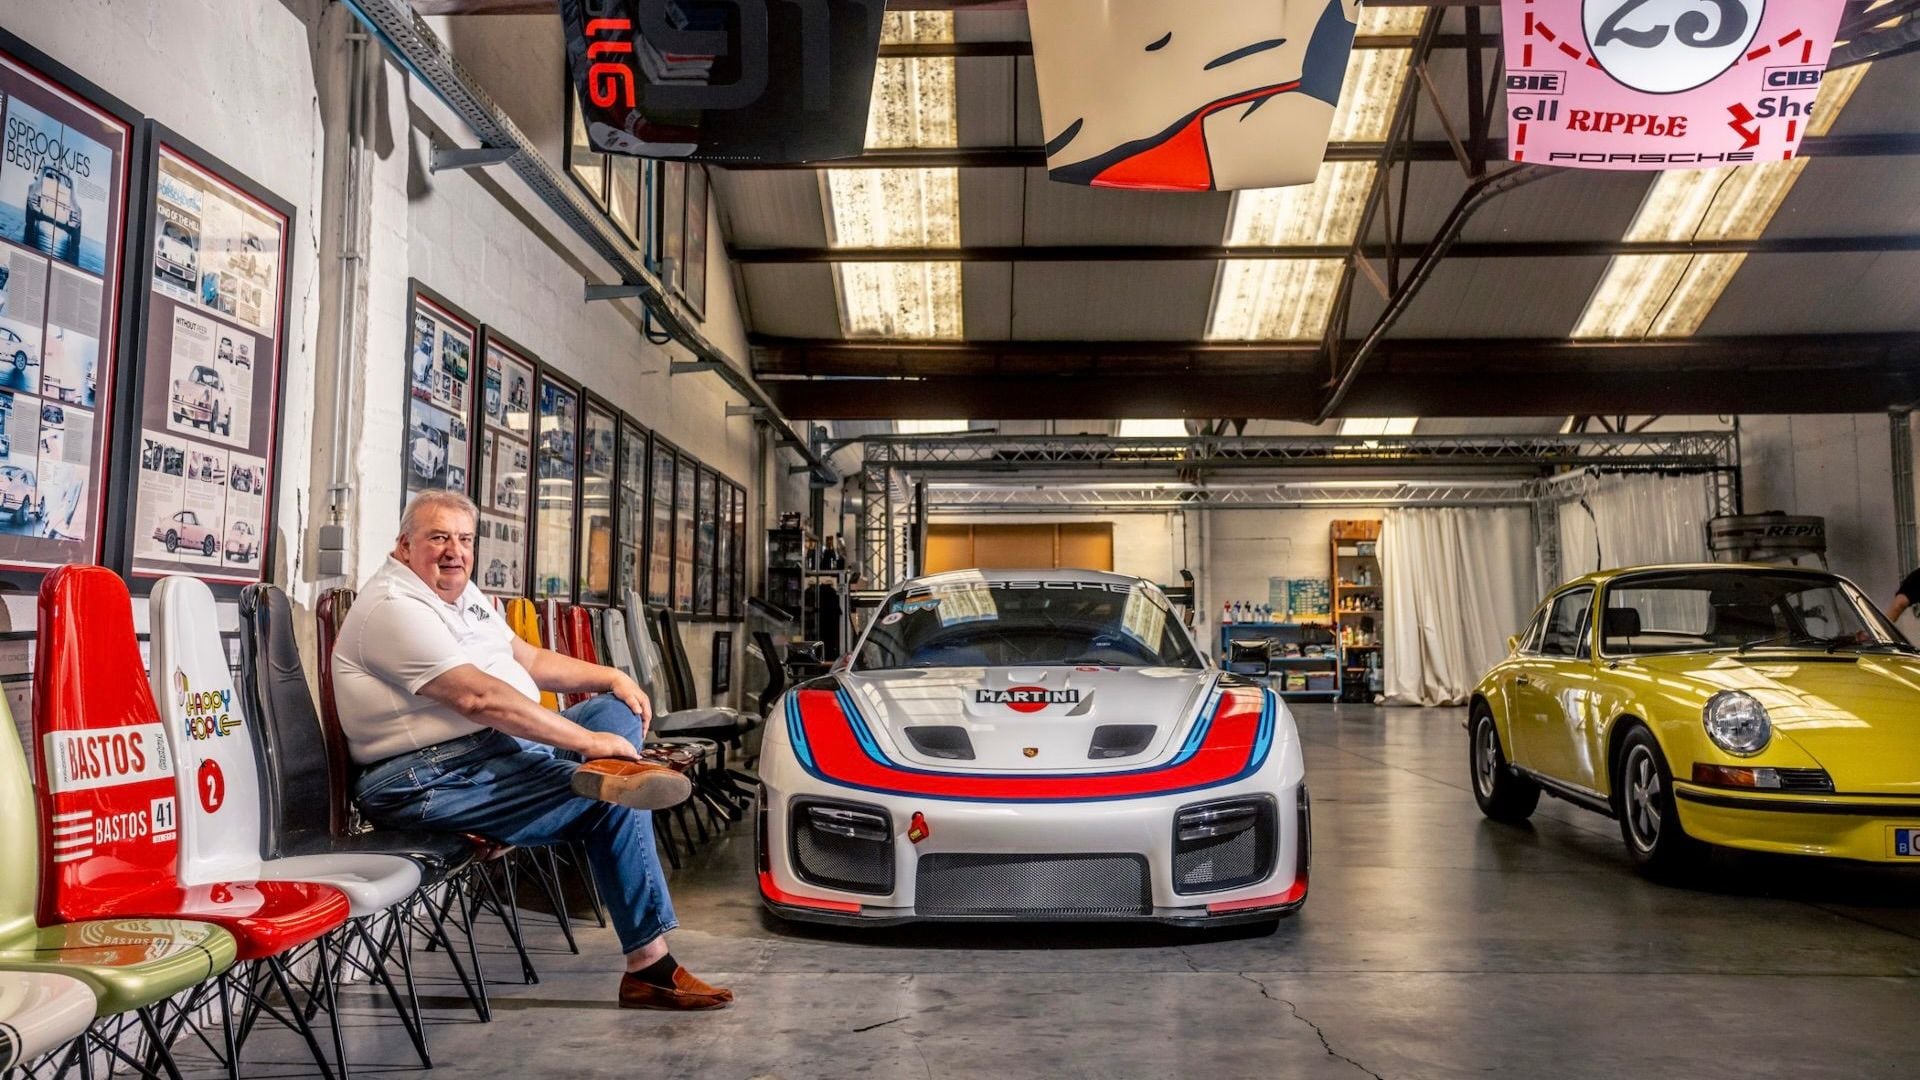 Porsche Fanatic Has More Than 50 Cars In His Collection | Rennlist